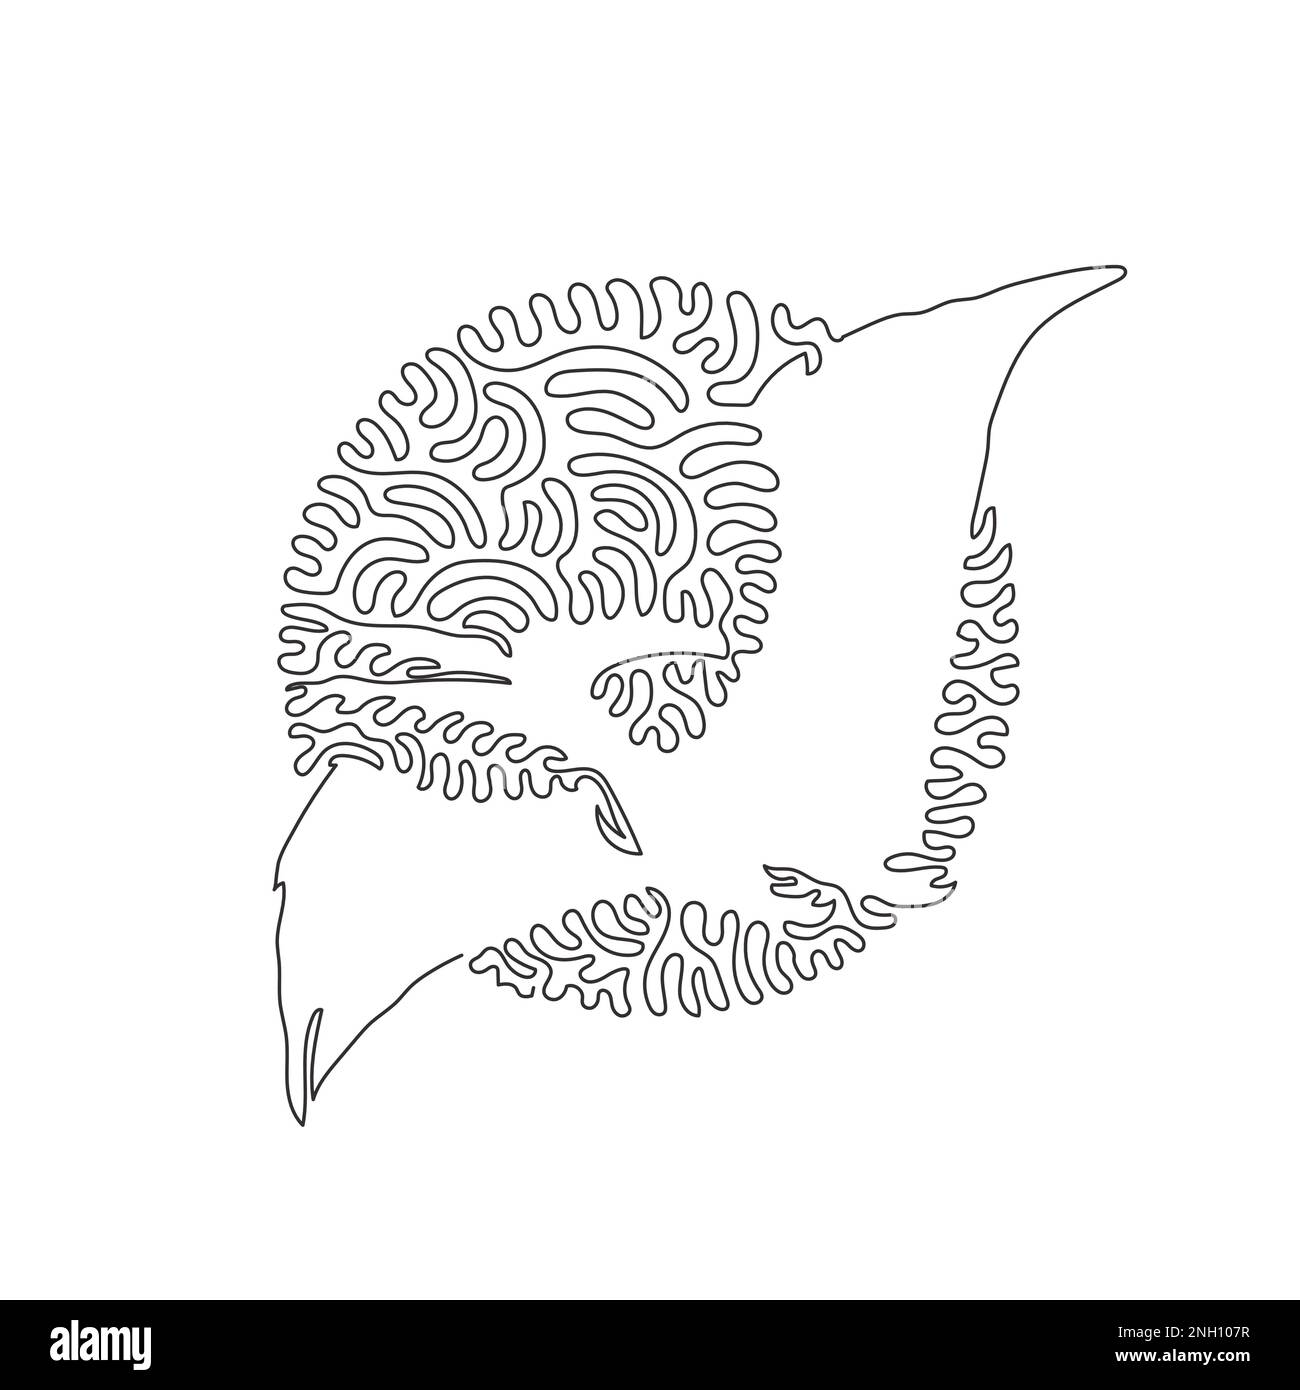 Single swirl continuous line drawing of winged reptile abstract art. Continuous line drawing design vector illustration of broad winged pterosaurs Stock Vector